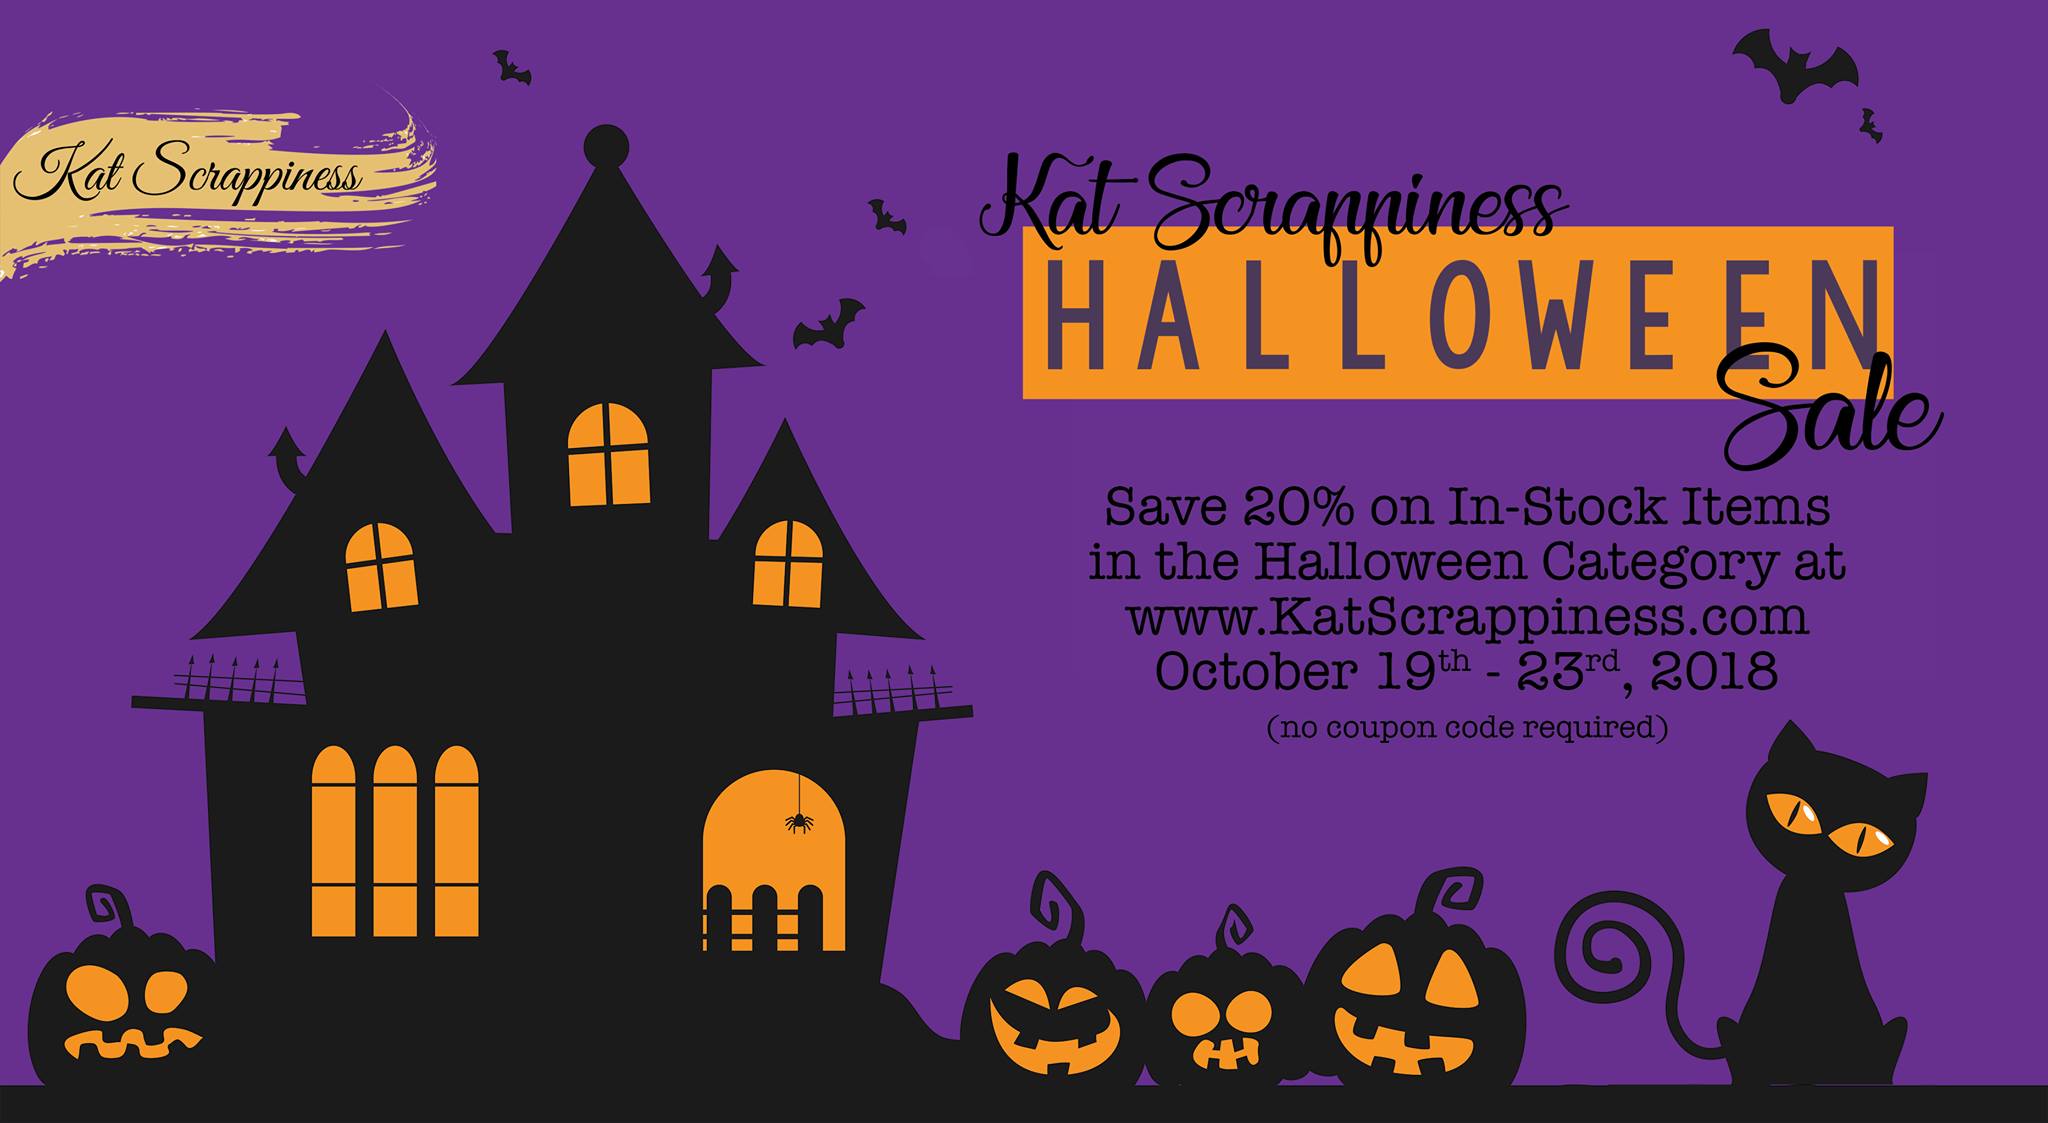 Save 20% on all Halloween and Thanksgiving Products at Kat Scrapiness